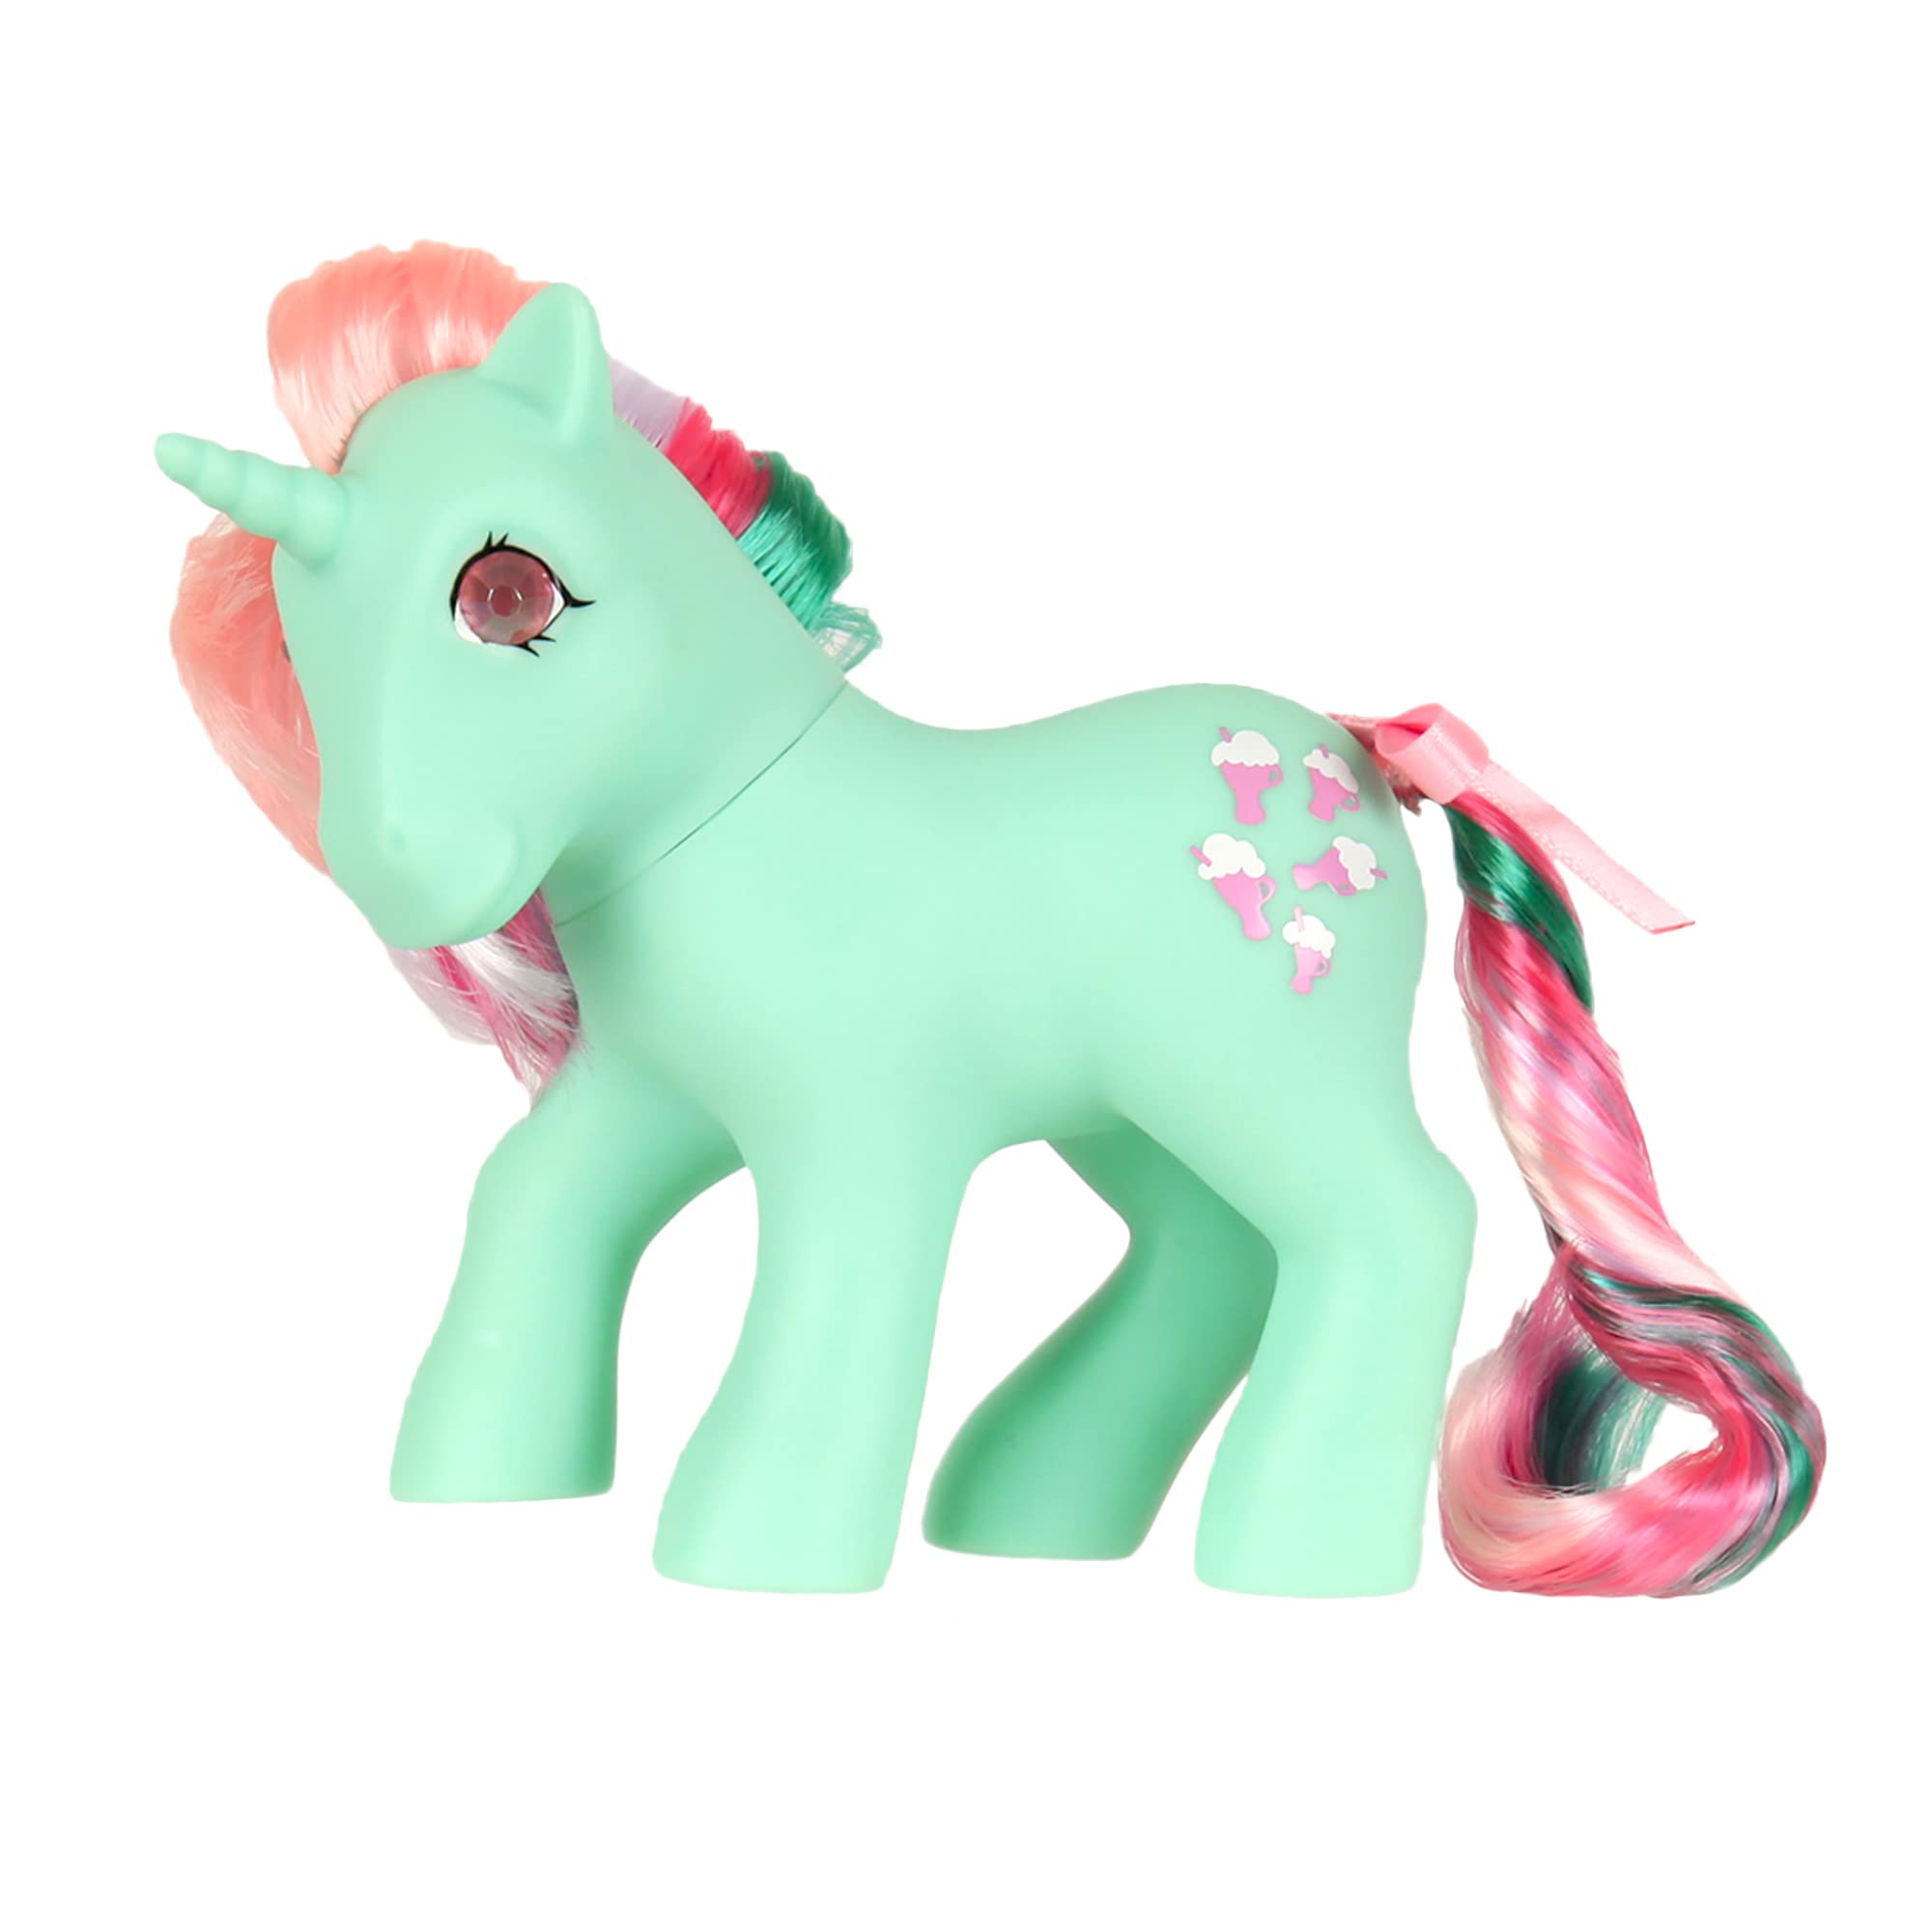 My Little Pony Fizzy Figure, Twinkle-Eyed Collection, MLP Retro Generation 1